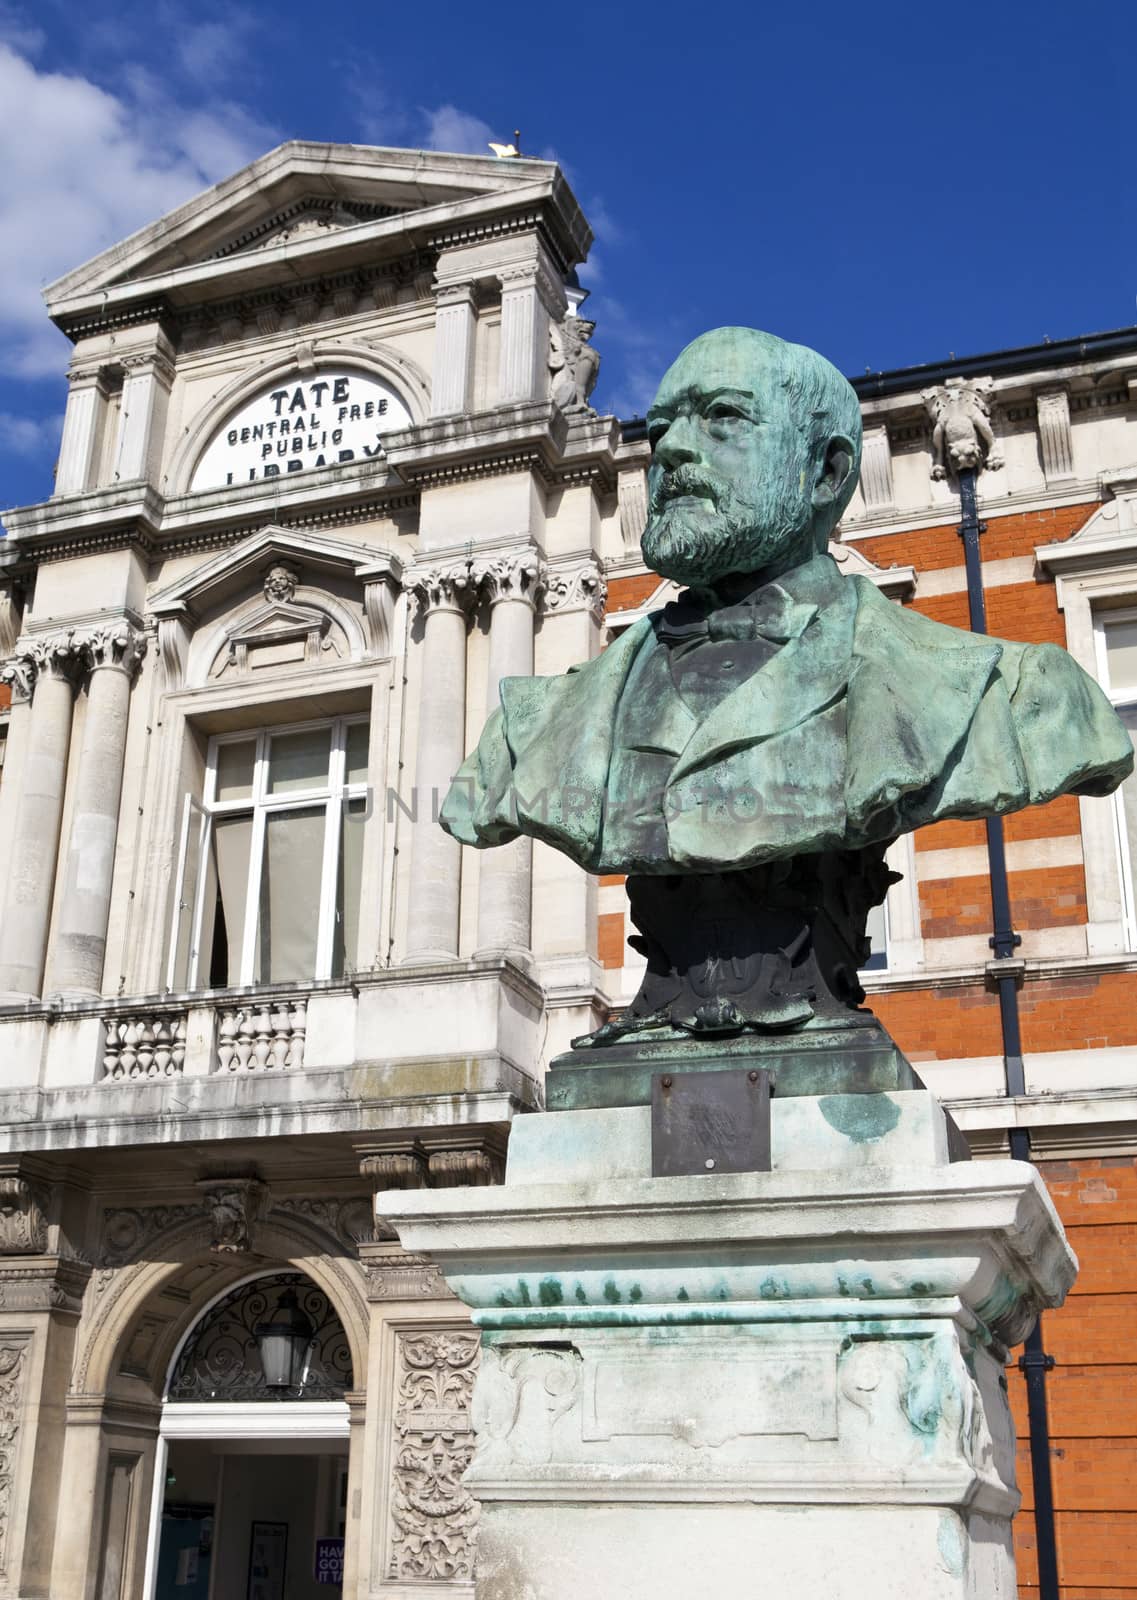 A bust dedicated to Sir Henry Tate situated outside the Tat Public Library in Brixton, London.